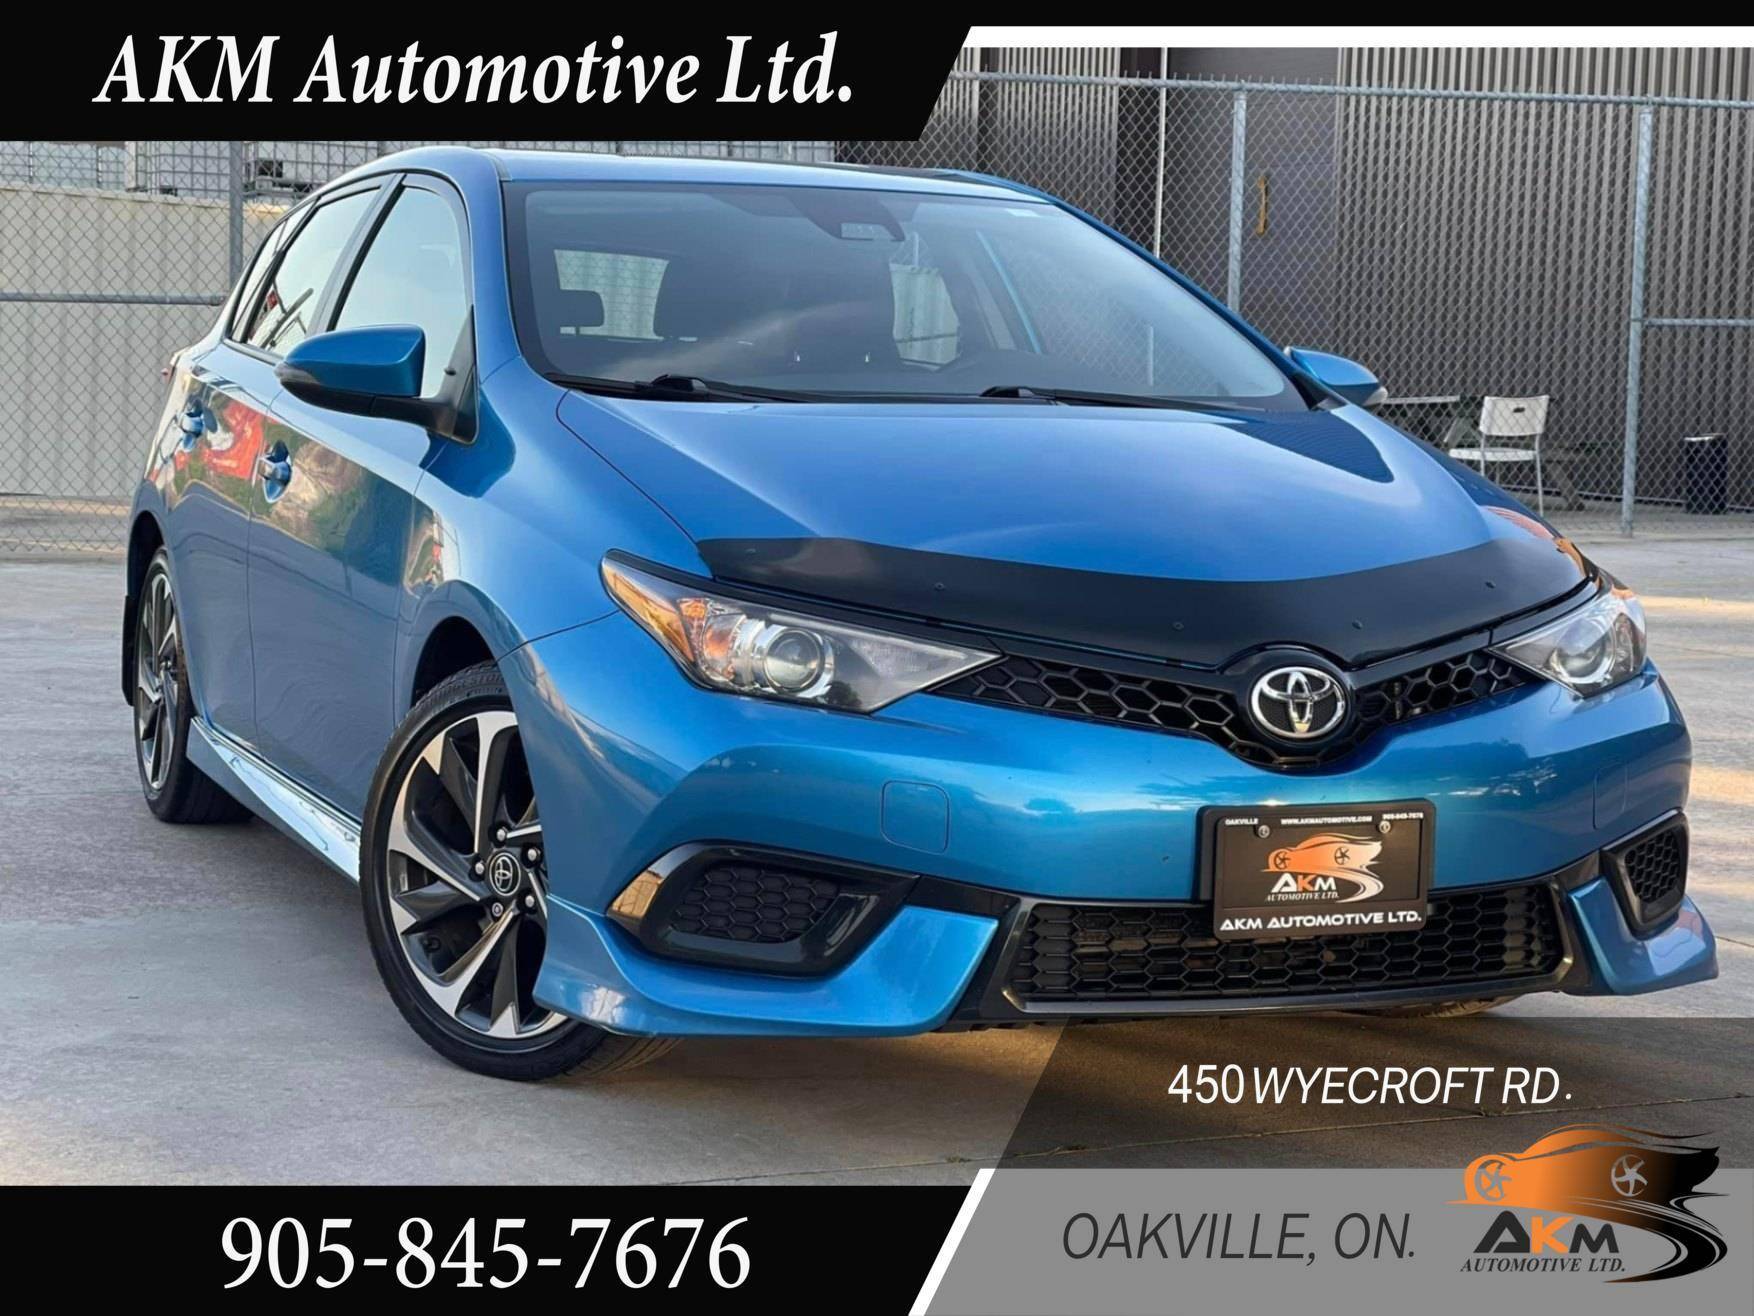 2017 Toyota Corolla iM 4dr HB IM, Accident Free, Certified